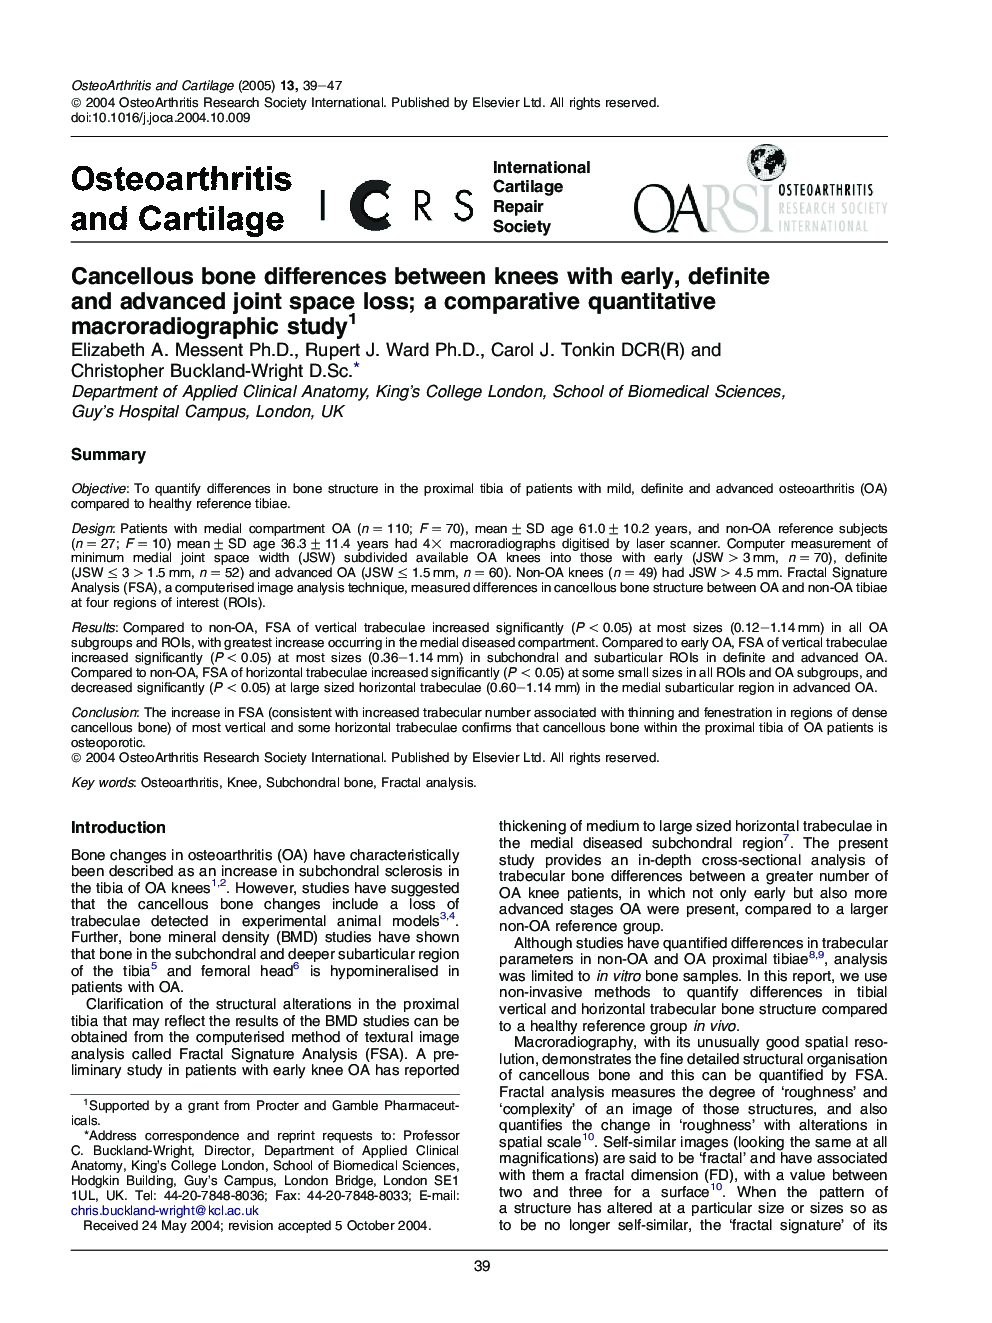 Cancellous bone differences between knees with early, definite and advanced joint space loss; a comparative quantitative macroradiographic study